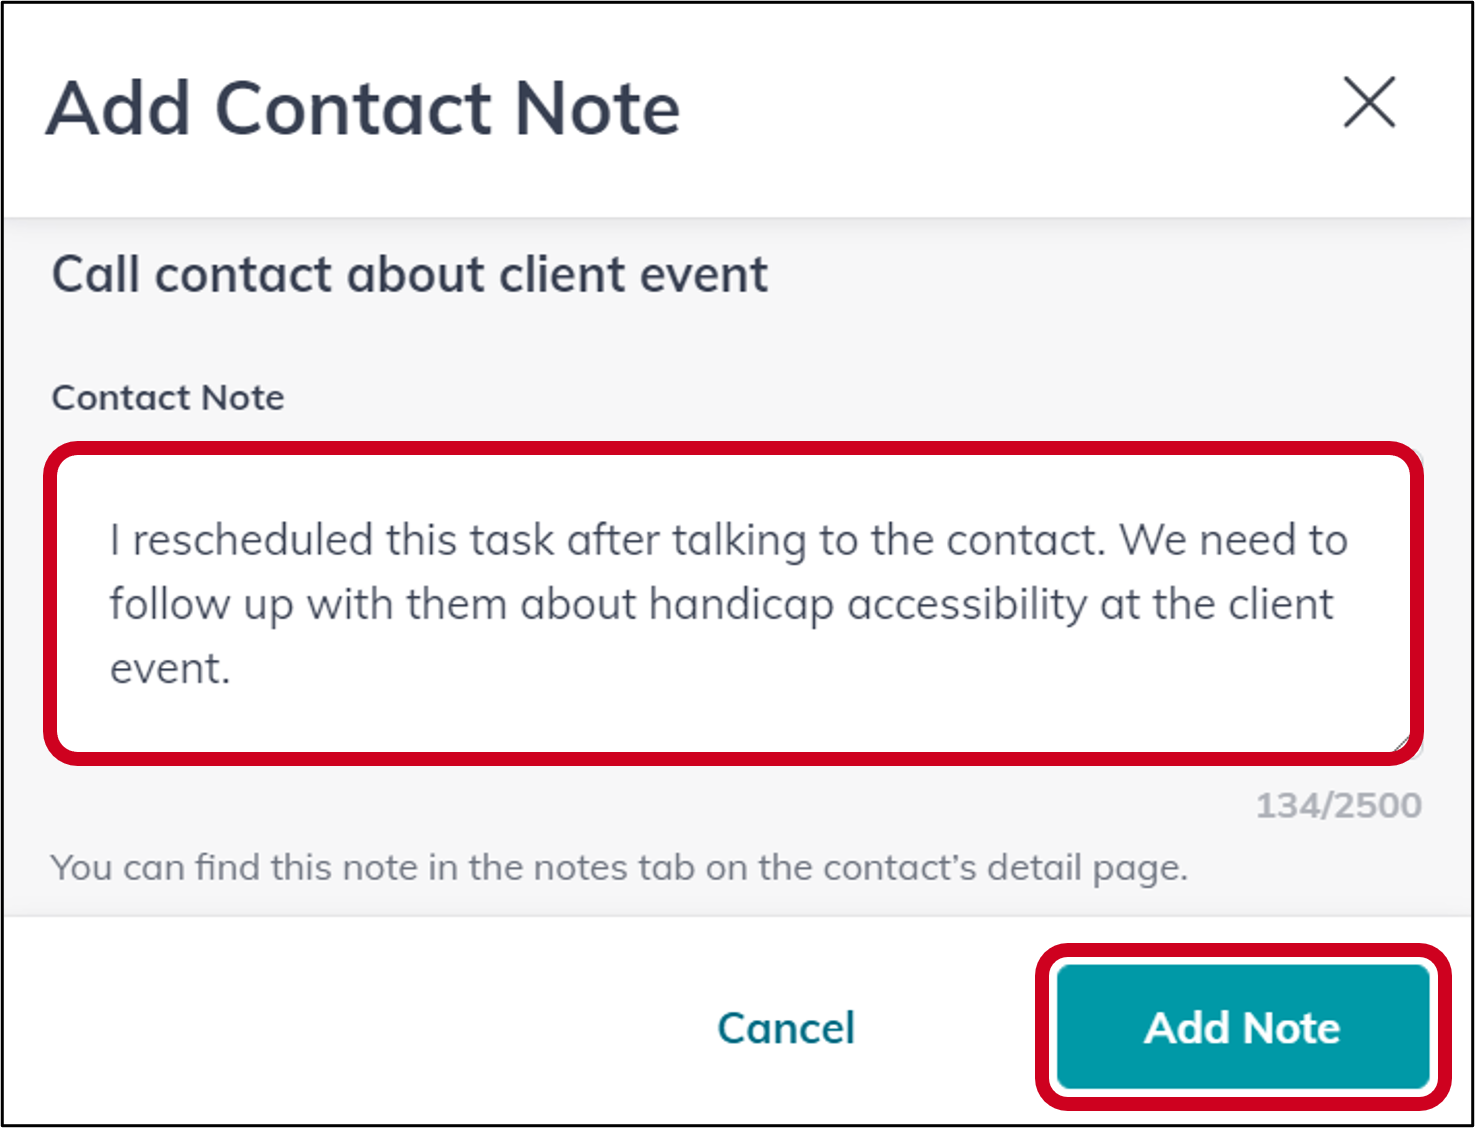 tasks_add_contact_note_details.png